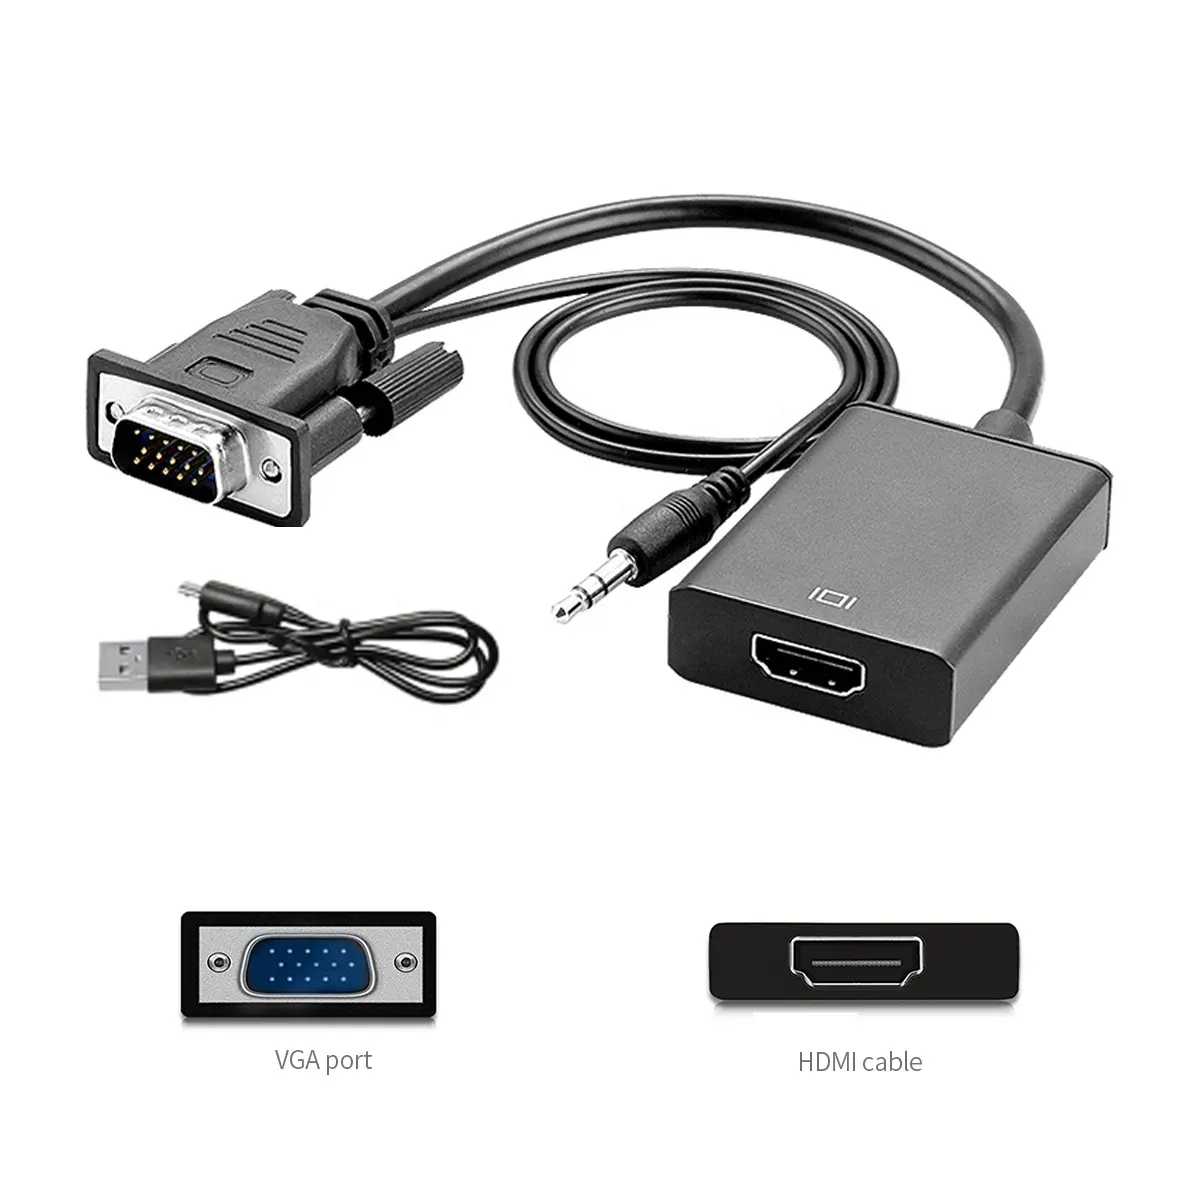 Black VGA to HDMI Cable with USB 3.5mm Stereo AV Cable Male to Female VGA to HDMI Convertor